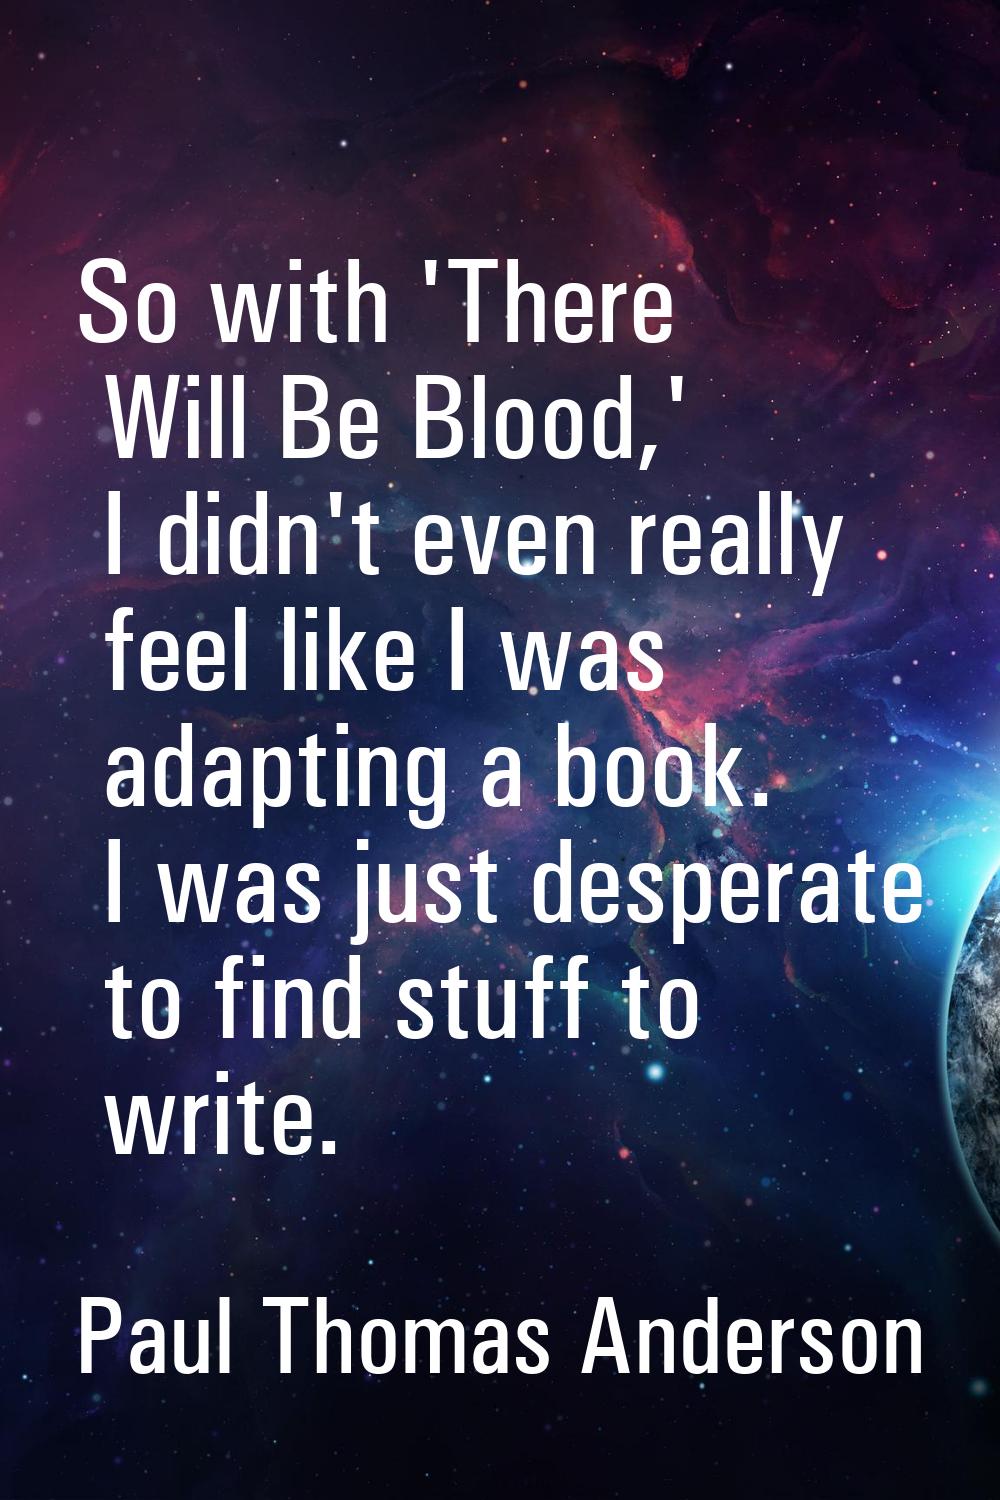 So with 'There Will Be Blood,' I didn't even really feel like I was adapting a book. I was just des